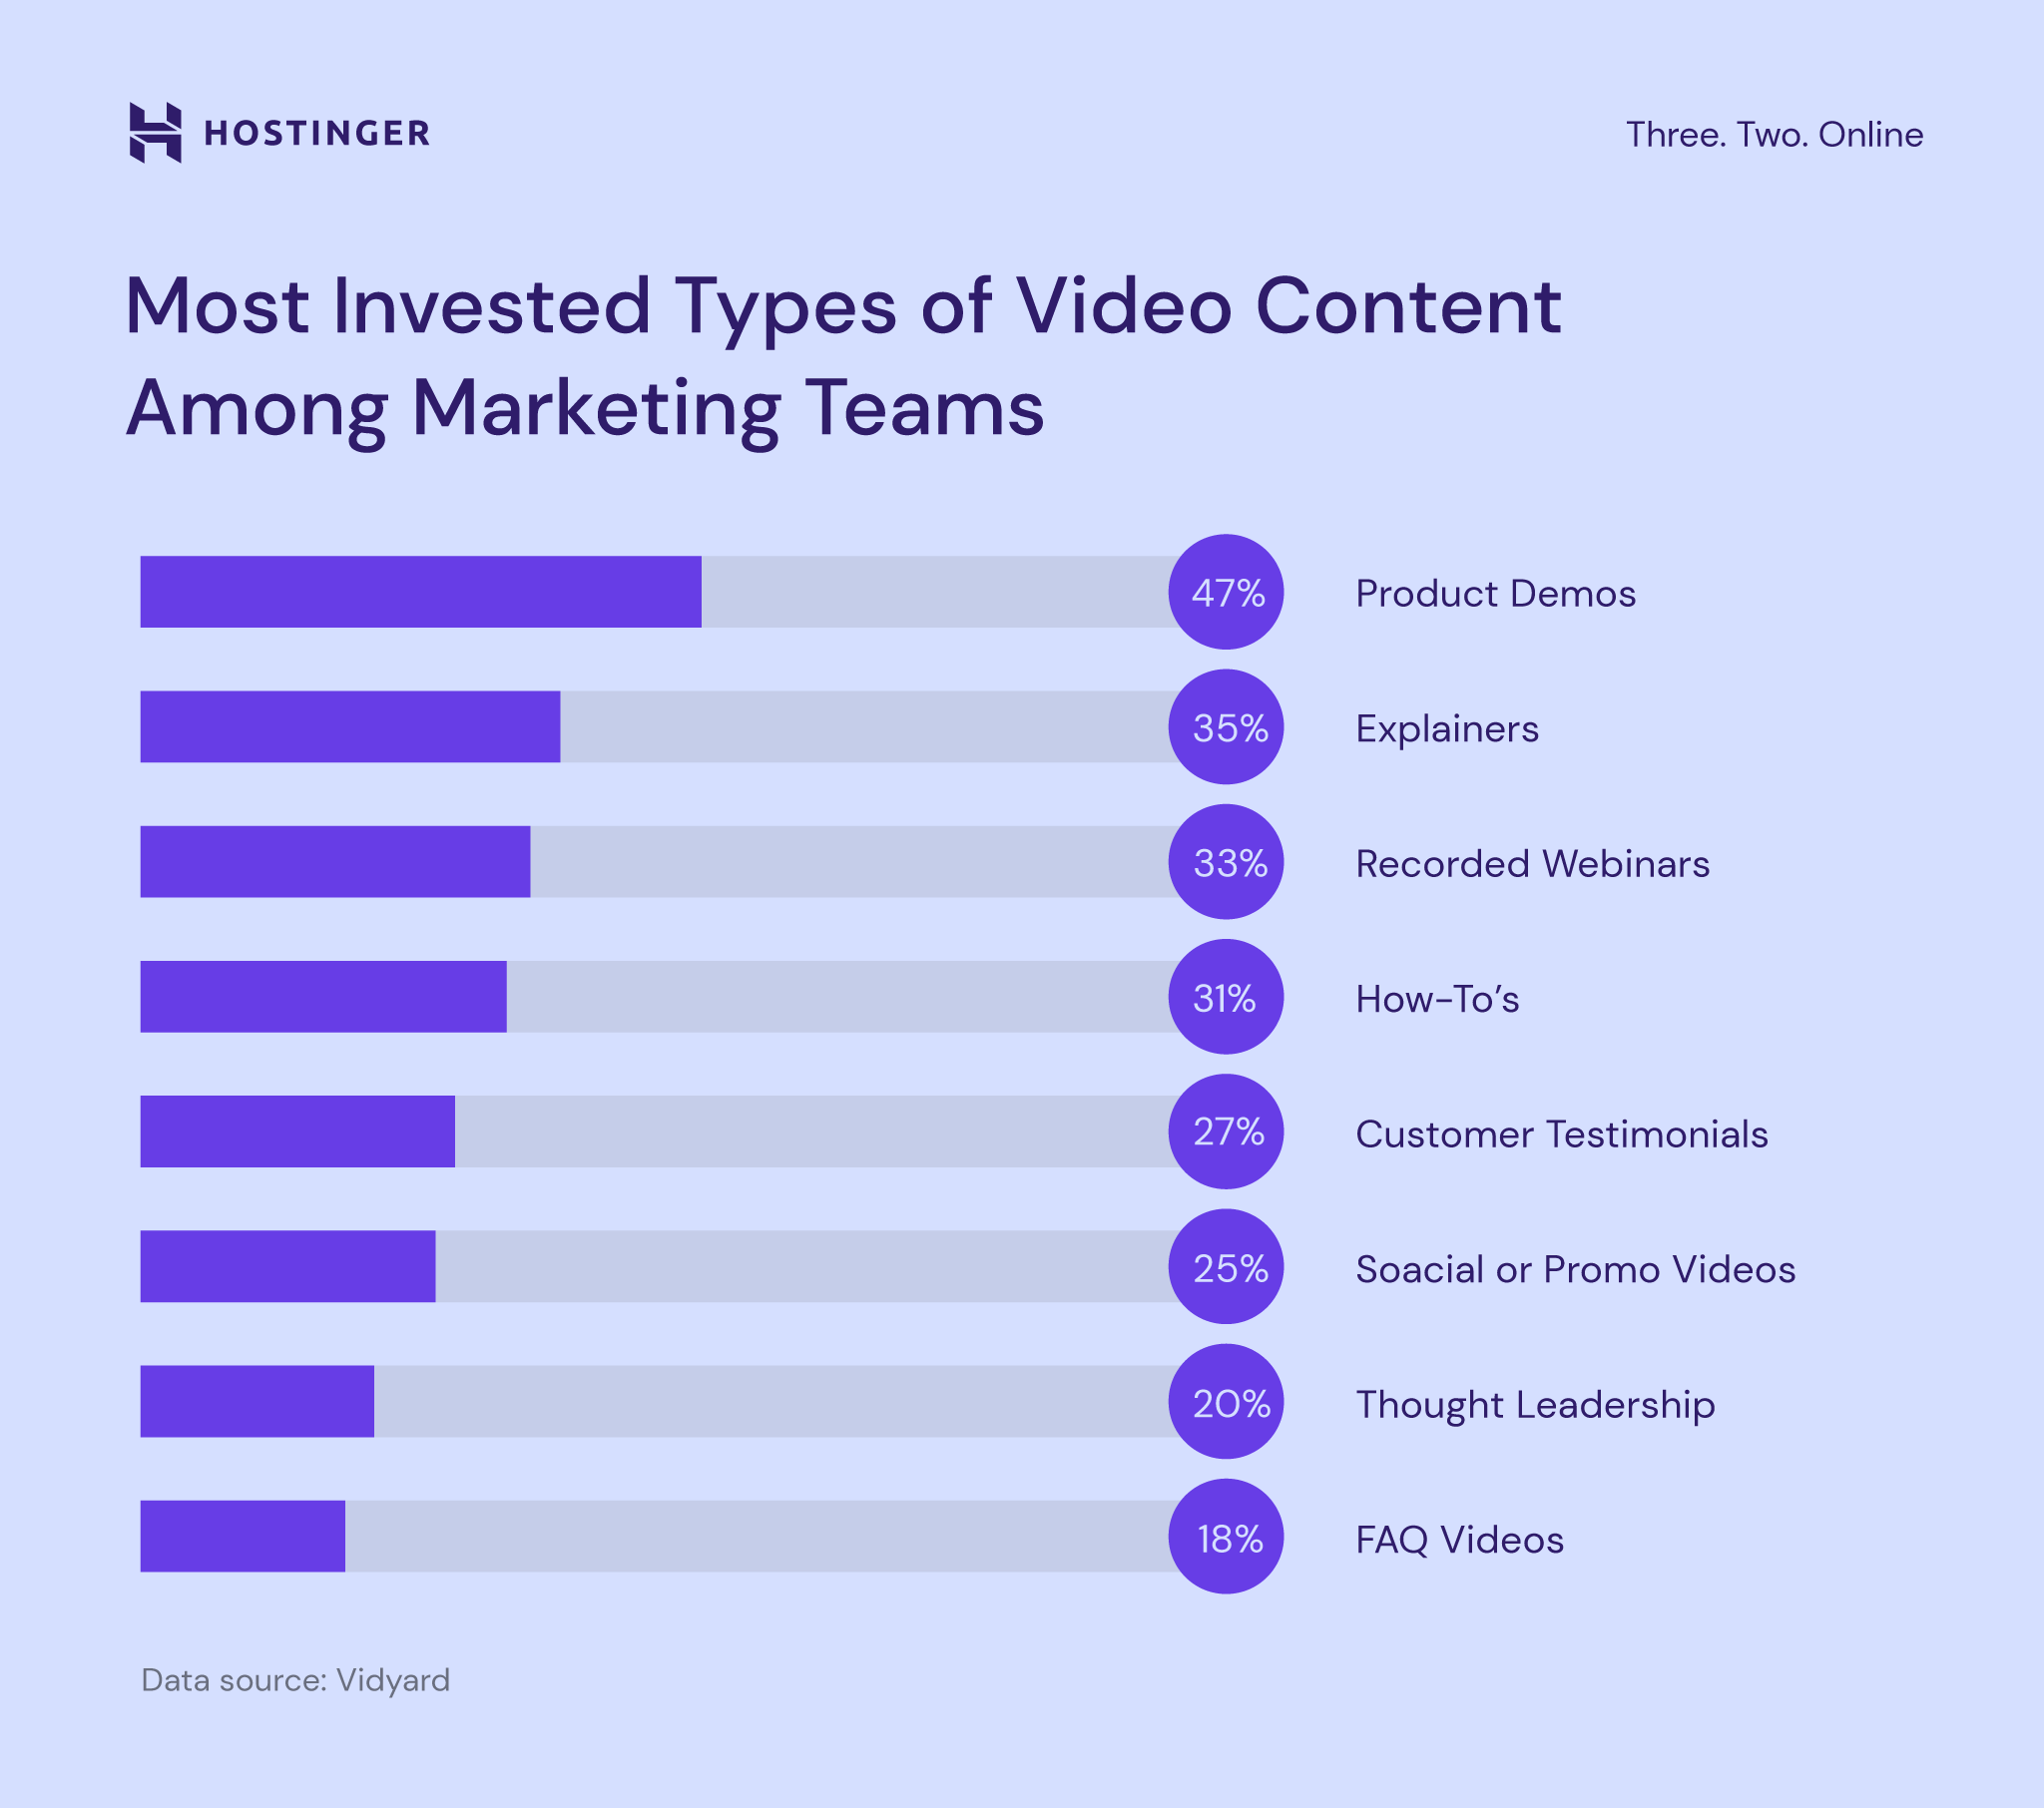 Most invested types of video content among marketing teams
